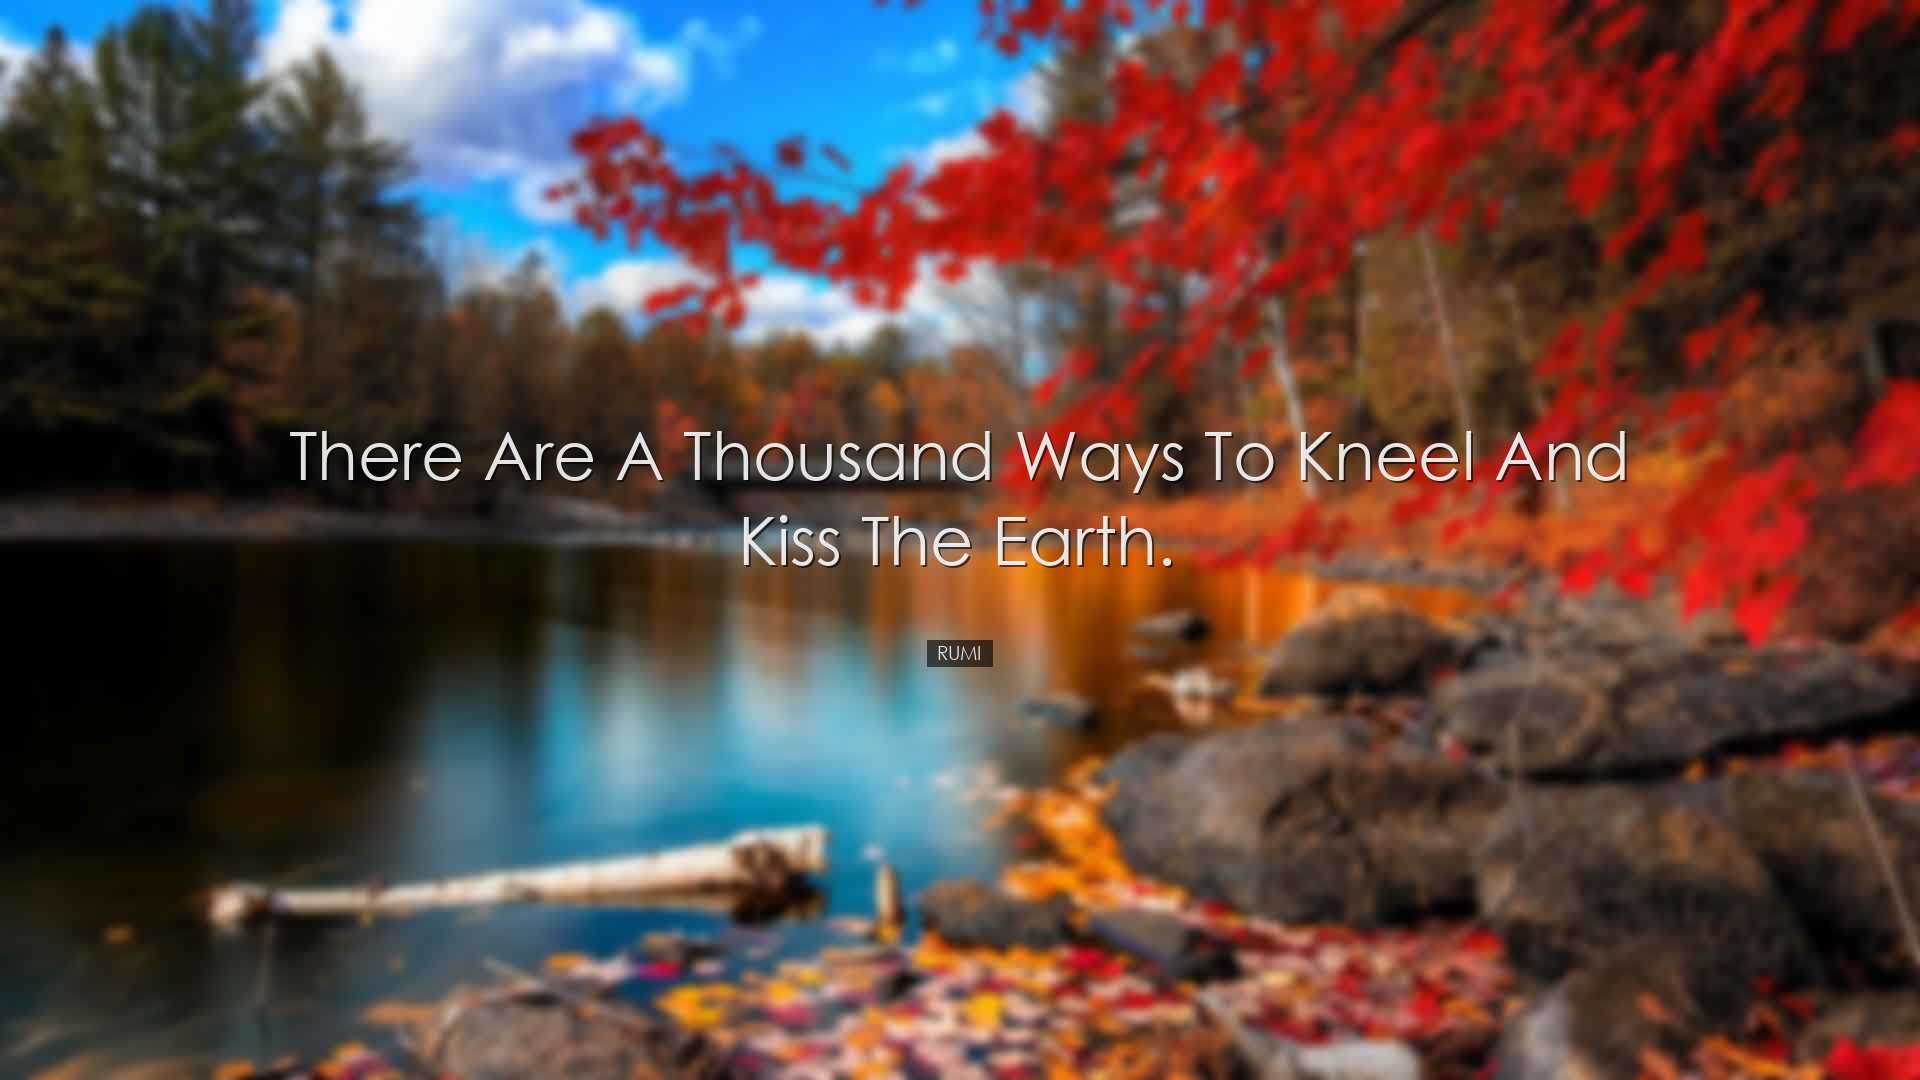 There are a thousand ways to kneel and kiss the earth. - Rumi